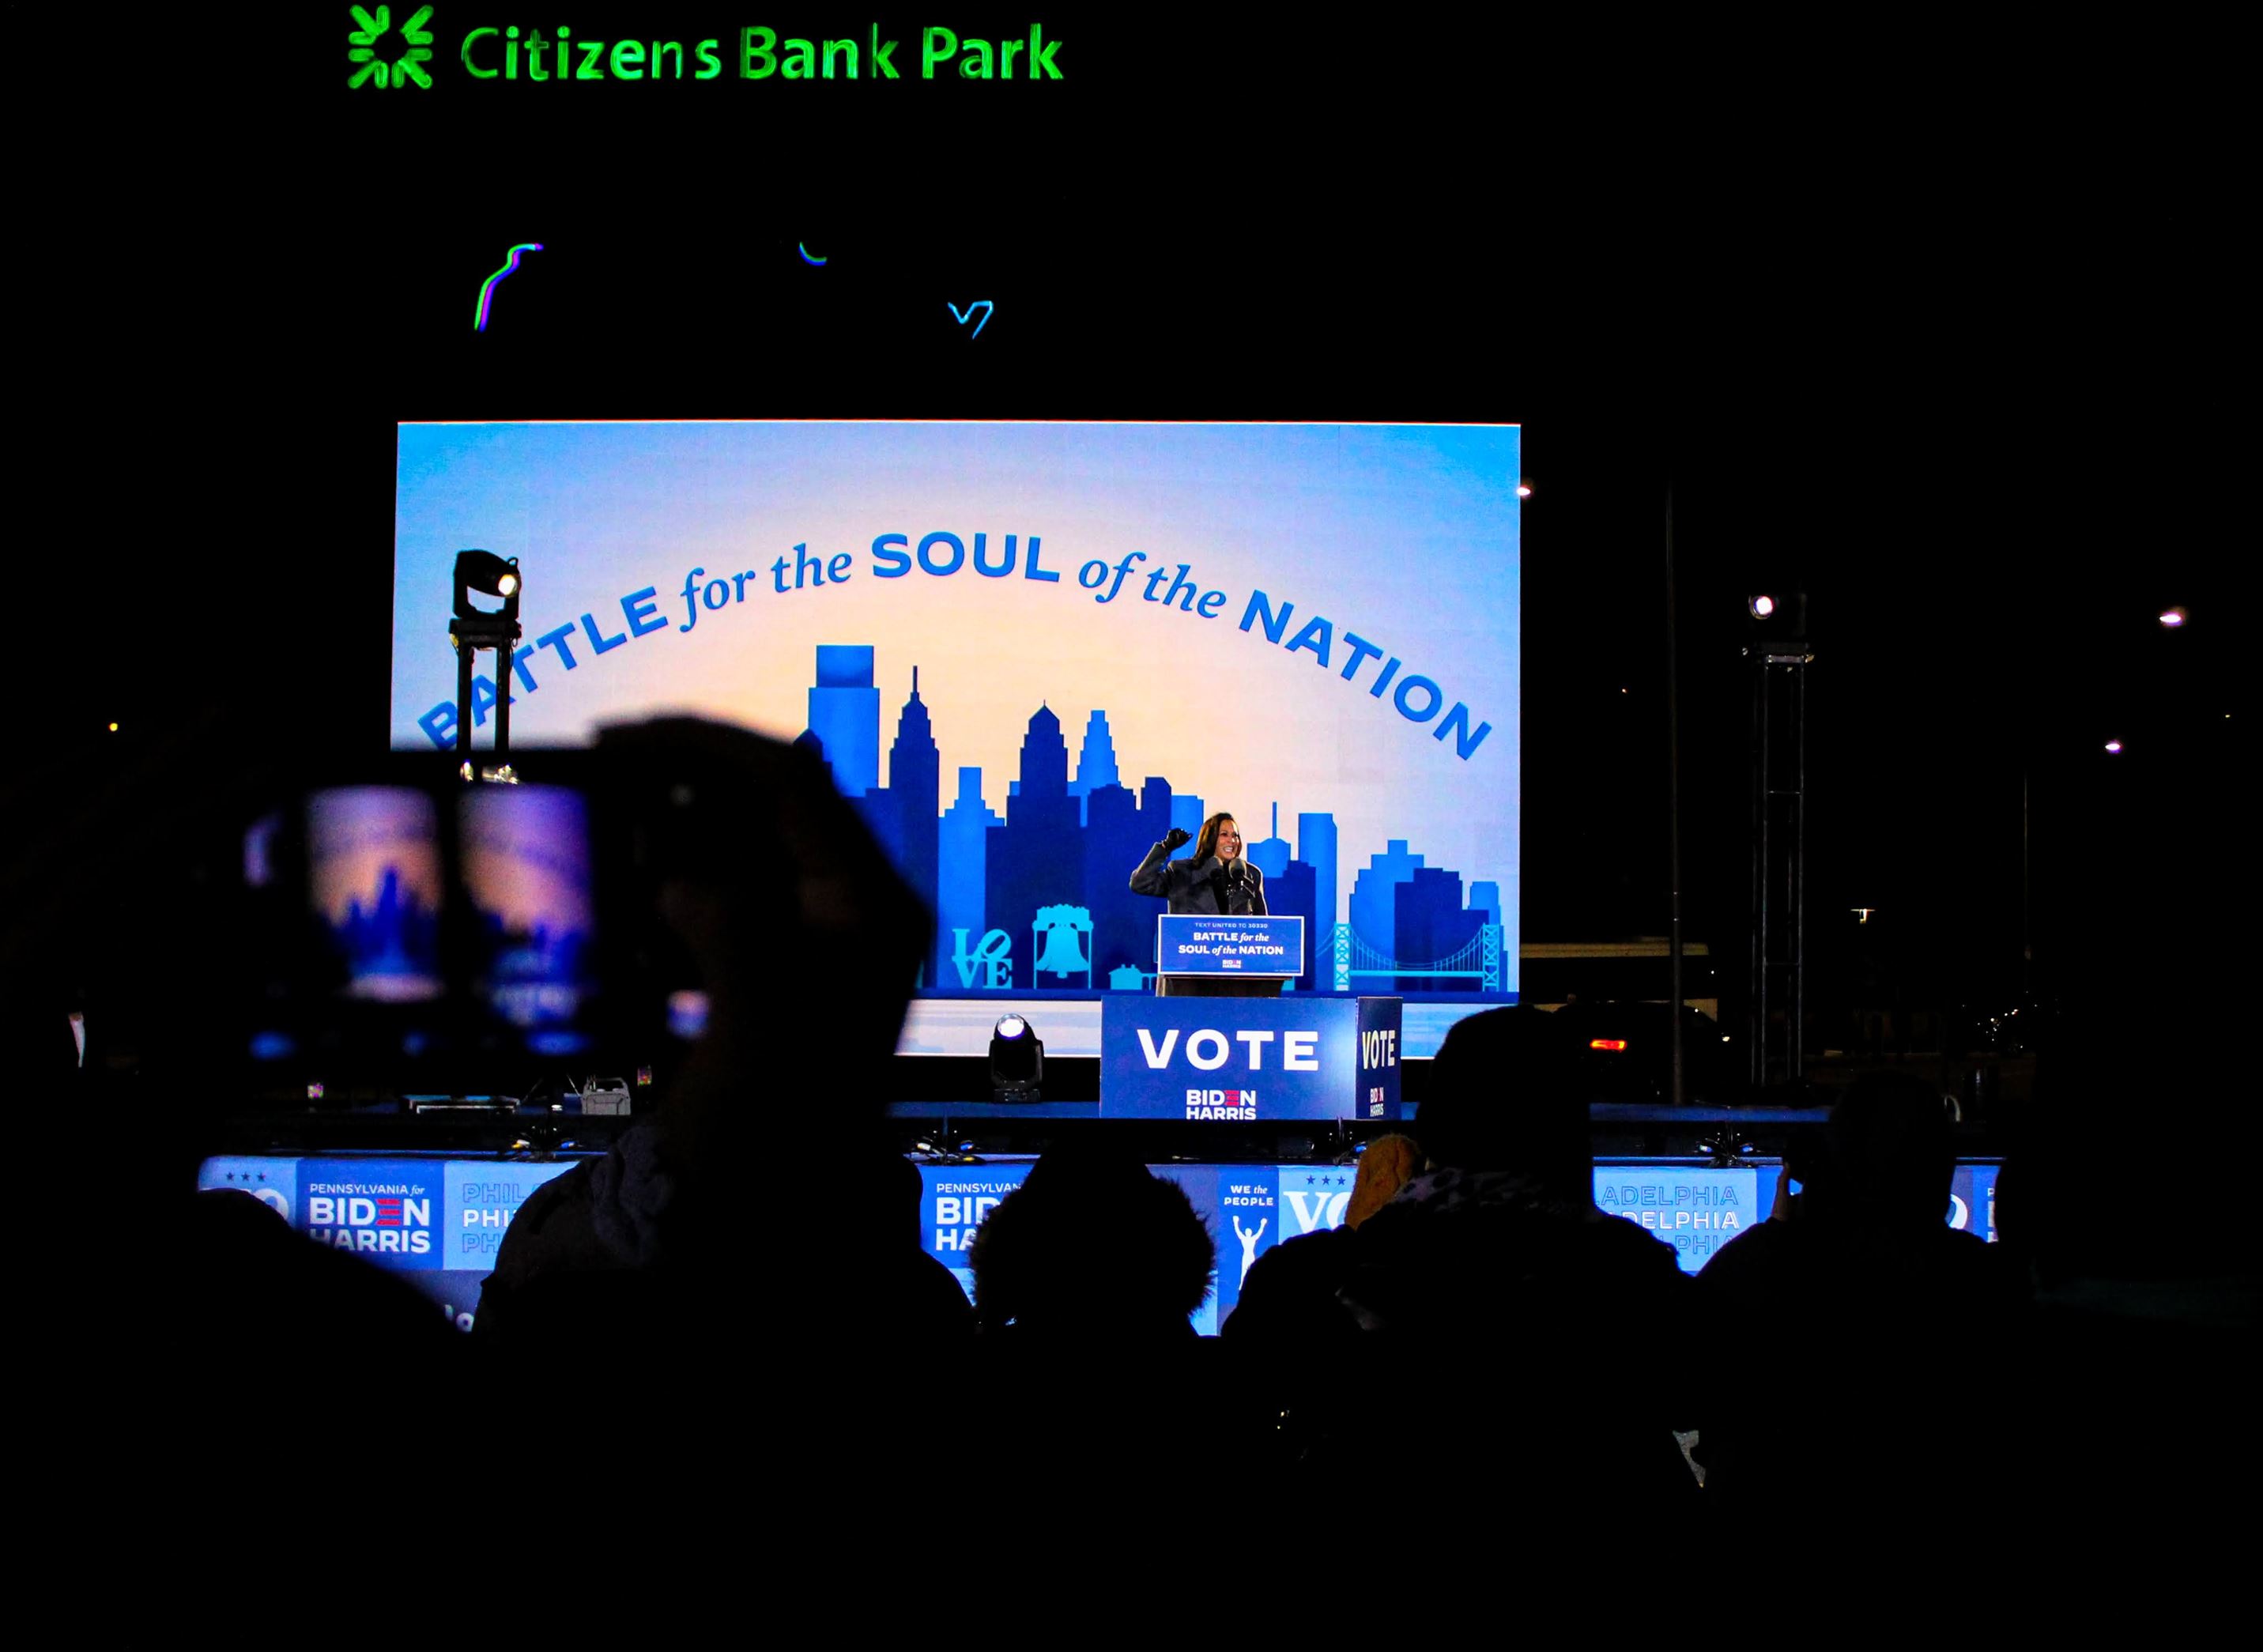 Vice presidential candidate Kamala Harris closes out her campaign in front of Citizens Bank Park, the home of the Philadelphia Phillies. Emma Caughlan | The Montclarion